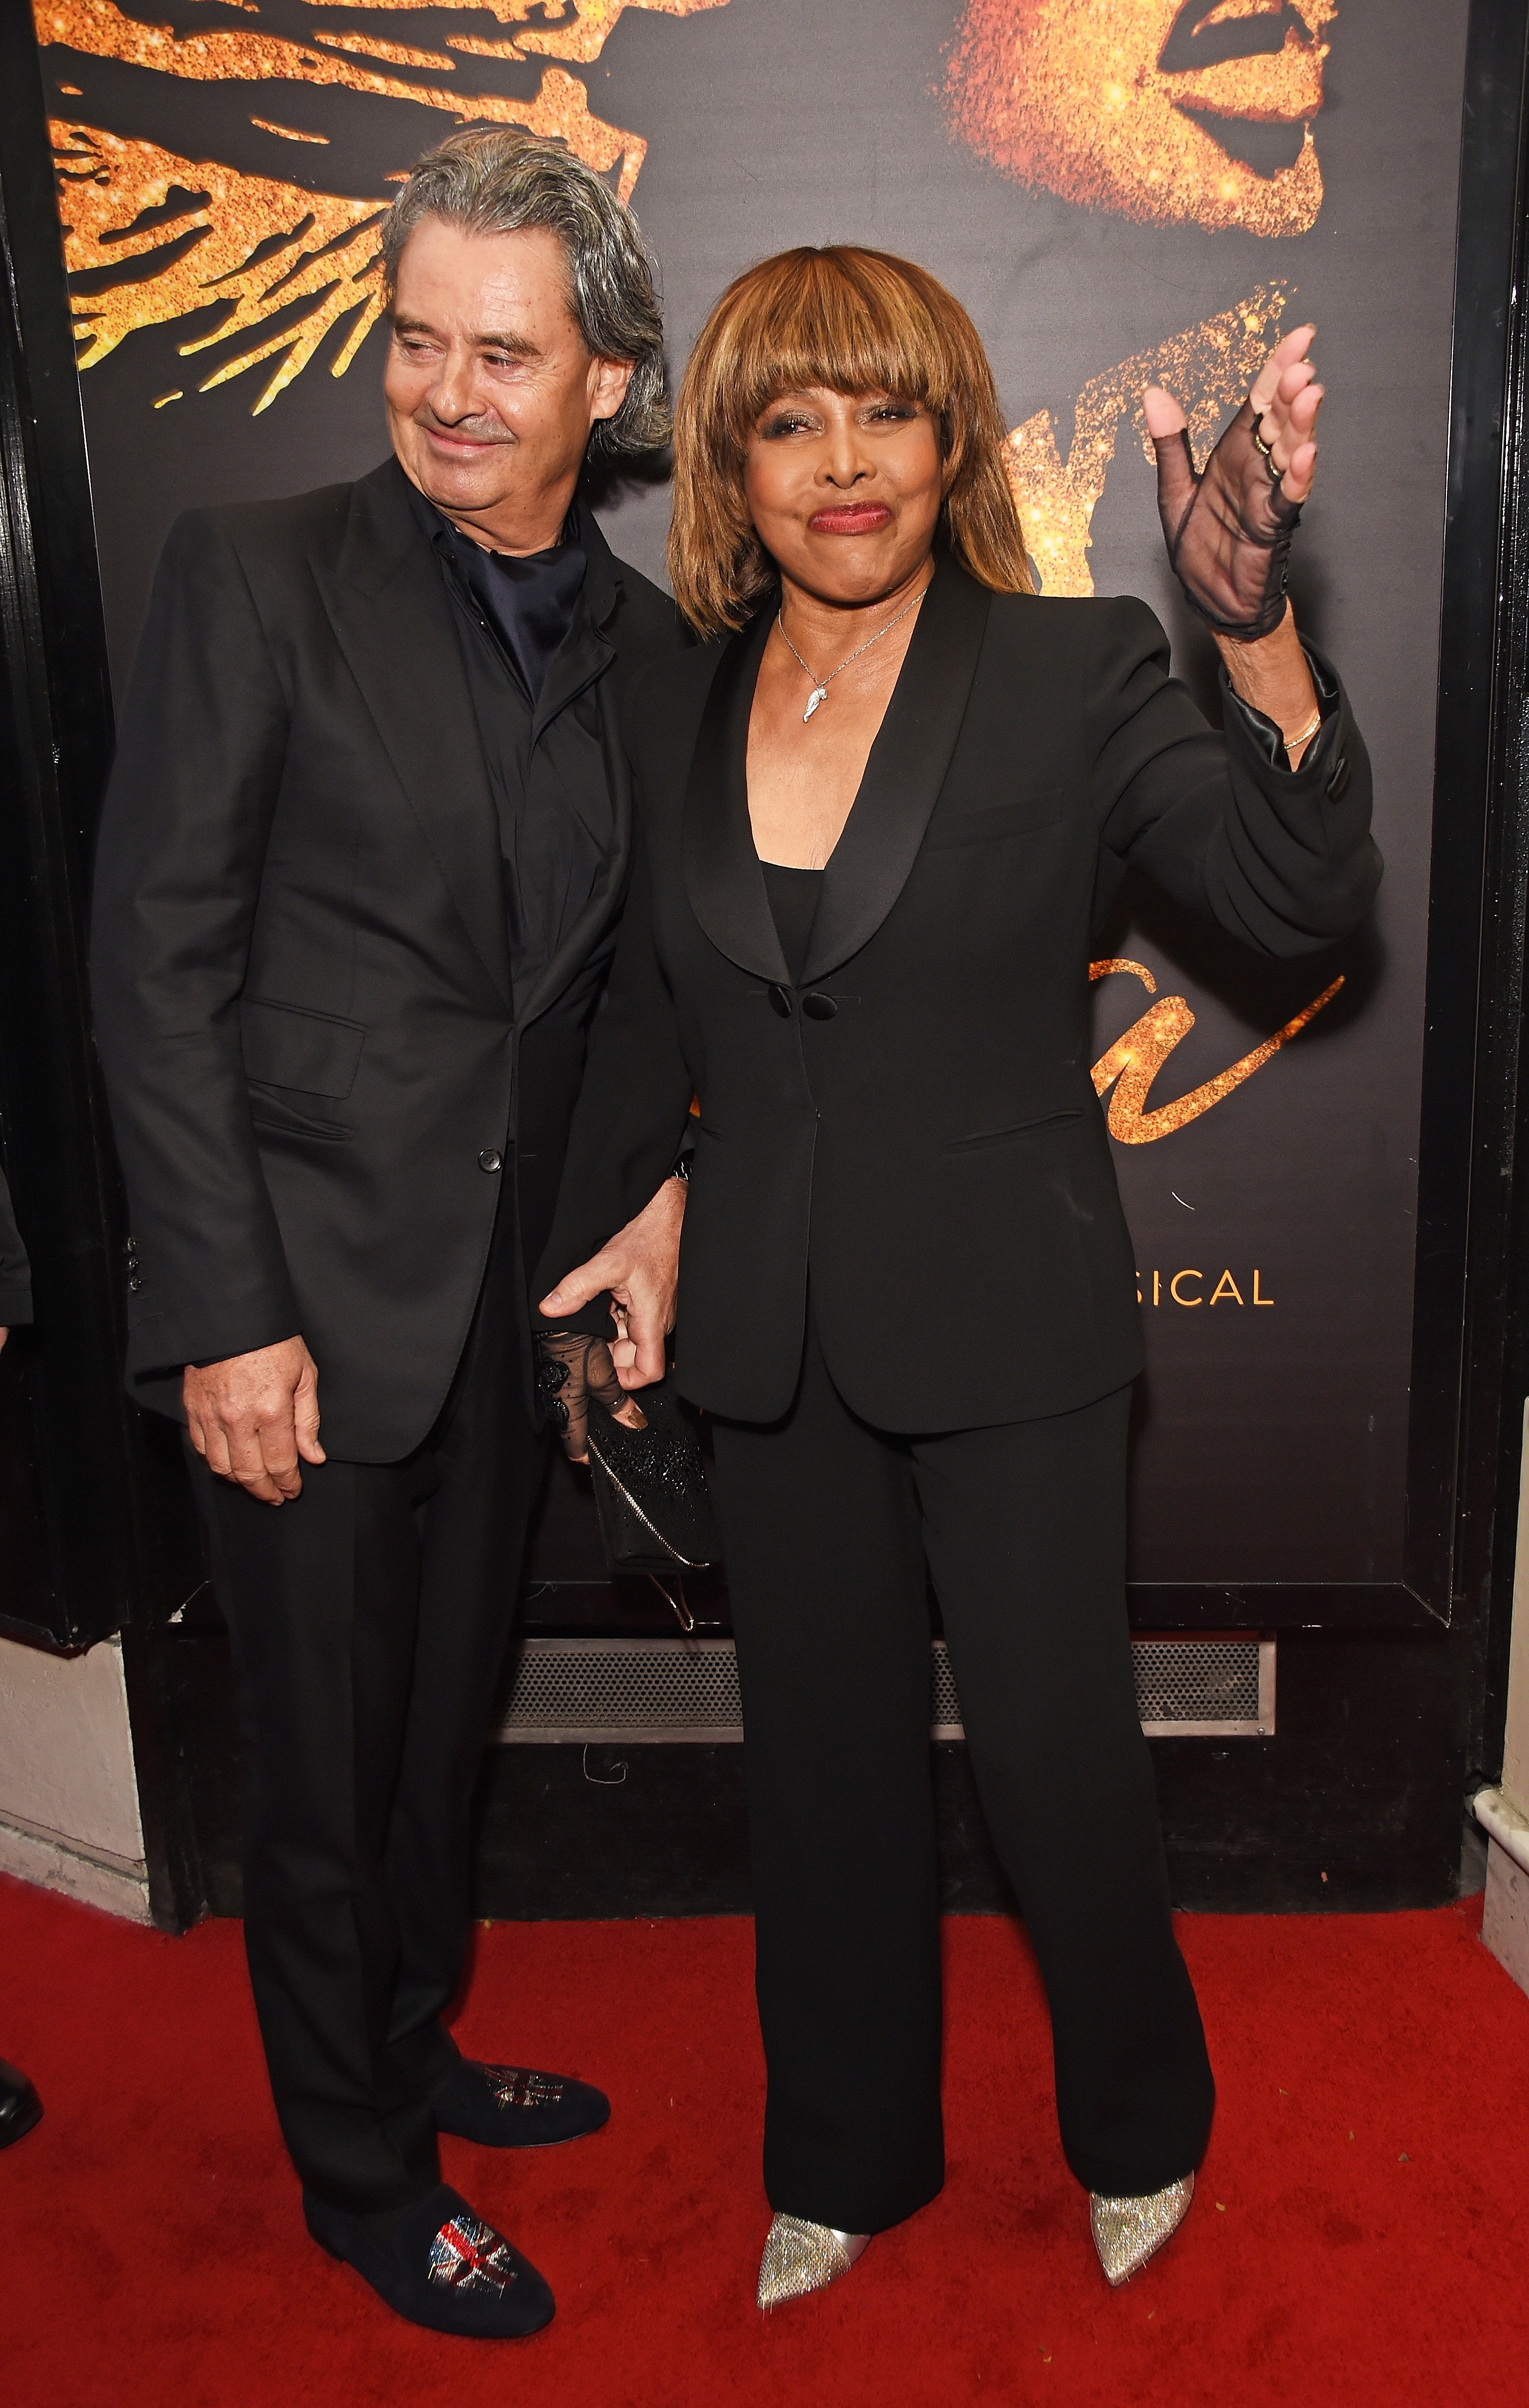 Erwin Bach and Tina Turner at the press night performance of "Tina: The Tina Turner Musical" on April 17, 2018 in London. | Photo: Getty Images